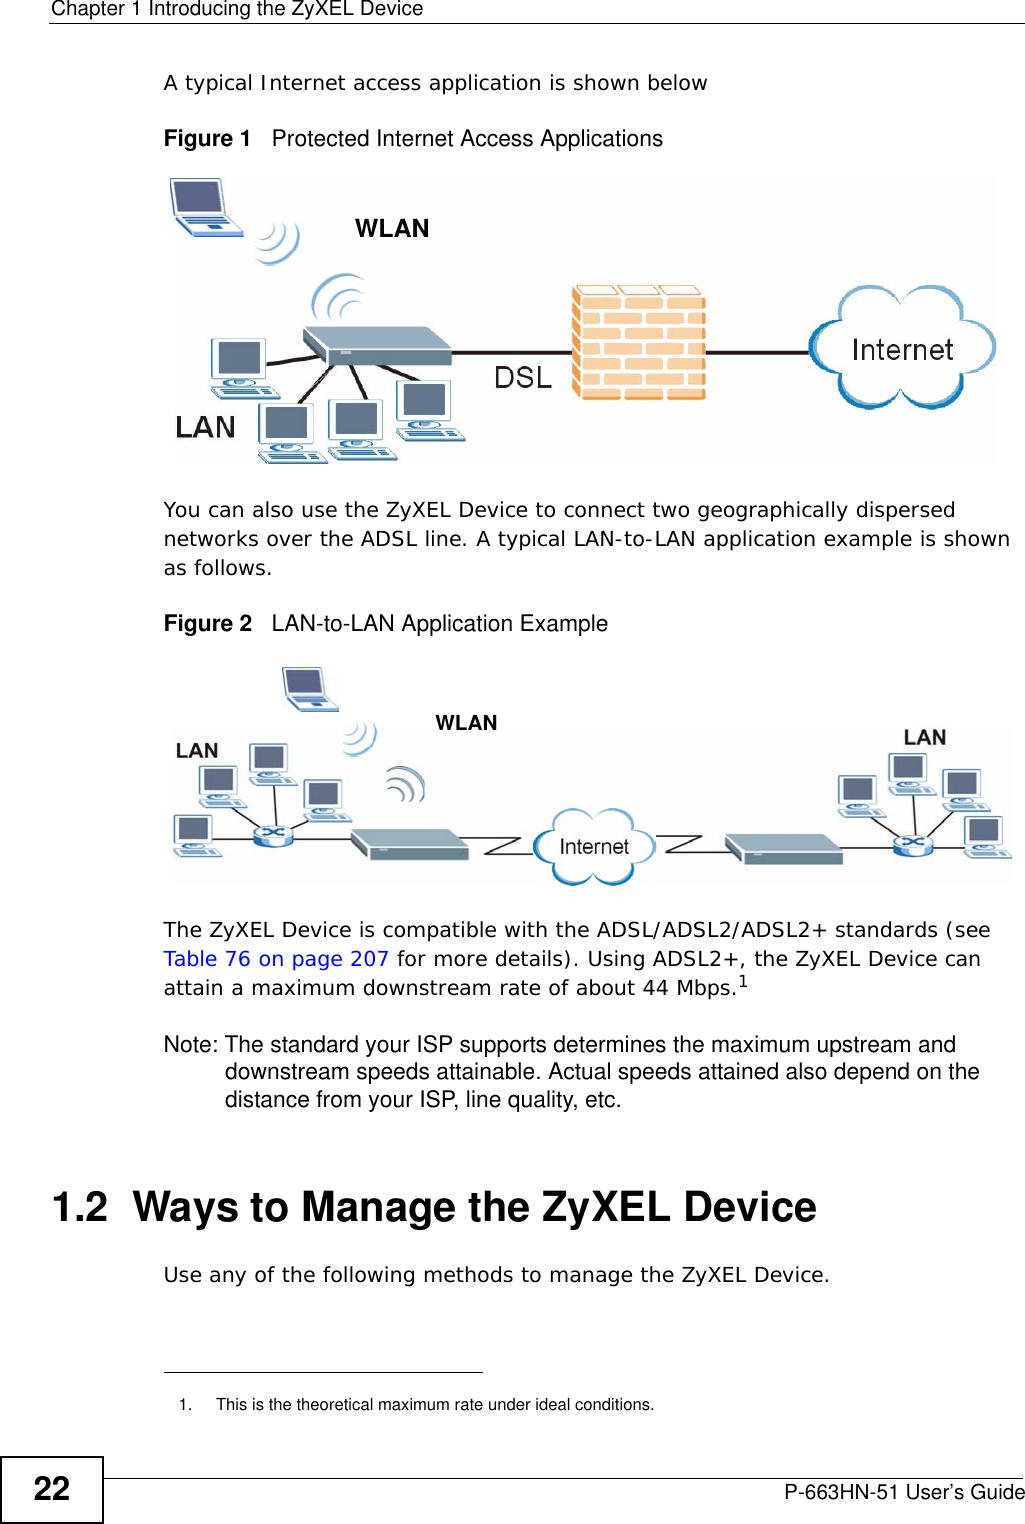 Chapter 1 Introducing the ZyXEL DeviceP-663HN-51 User’s Guide22A typical Internet access application is shown belowFigure 1   Protected Internet Access ApplicationsYou can also use the ZyXEL Device to connect two geographically dispersed networks over the ADSL line. A typical LAN-to-LAN application example is shown as follows.Figure 2   LAN-to-LAN Application ExampleThe ZyXEL Device is compatible with the ADSL/ADSL2/ADSL2+ standards (see Table 76 on page 207 for more details). Using ADSL2+, the ZyXEL Device can attain a maximum downstream rate of about 44 Mbps.1Note: The standard your ISP supports determines the maximum upstream and downstream speeds attainable. Actual speeds attained also depend on the distance from your ISP, line quality, etc.1.2  Ways to Manage the ZyXEL DeviceUse any of the following methods to manage the ZyXEL Device.1. This is the theoretical maximum rate under ideal conditions.WLANWLAN